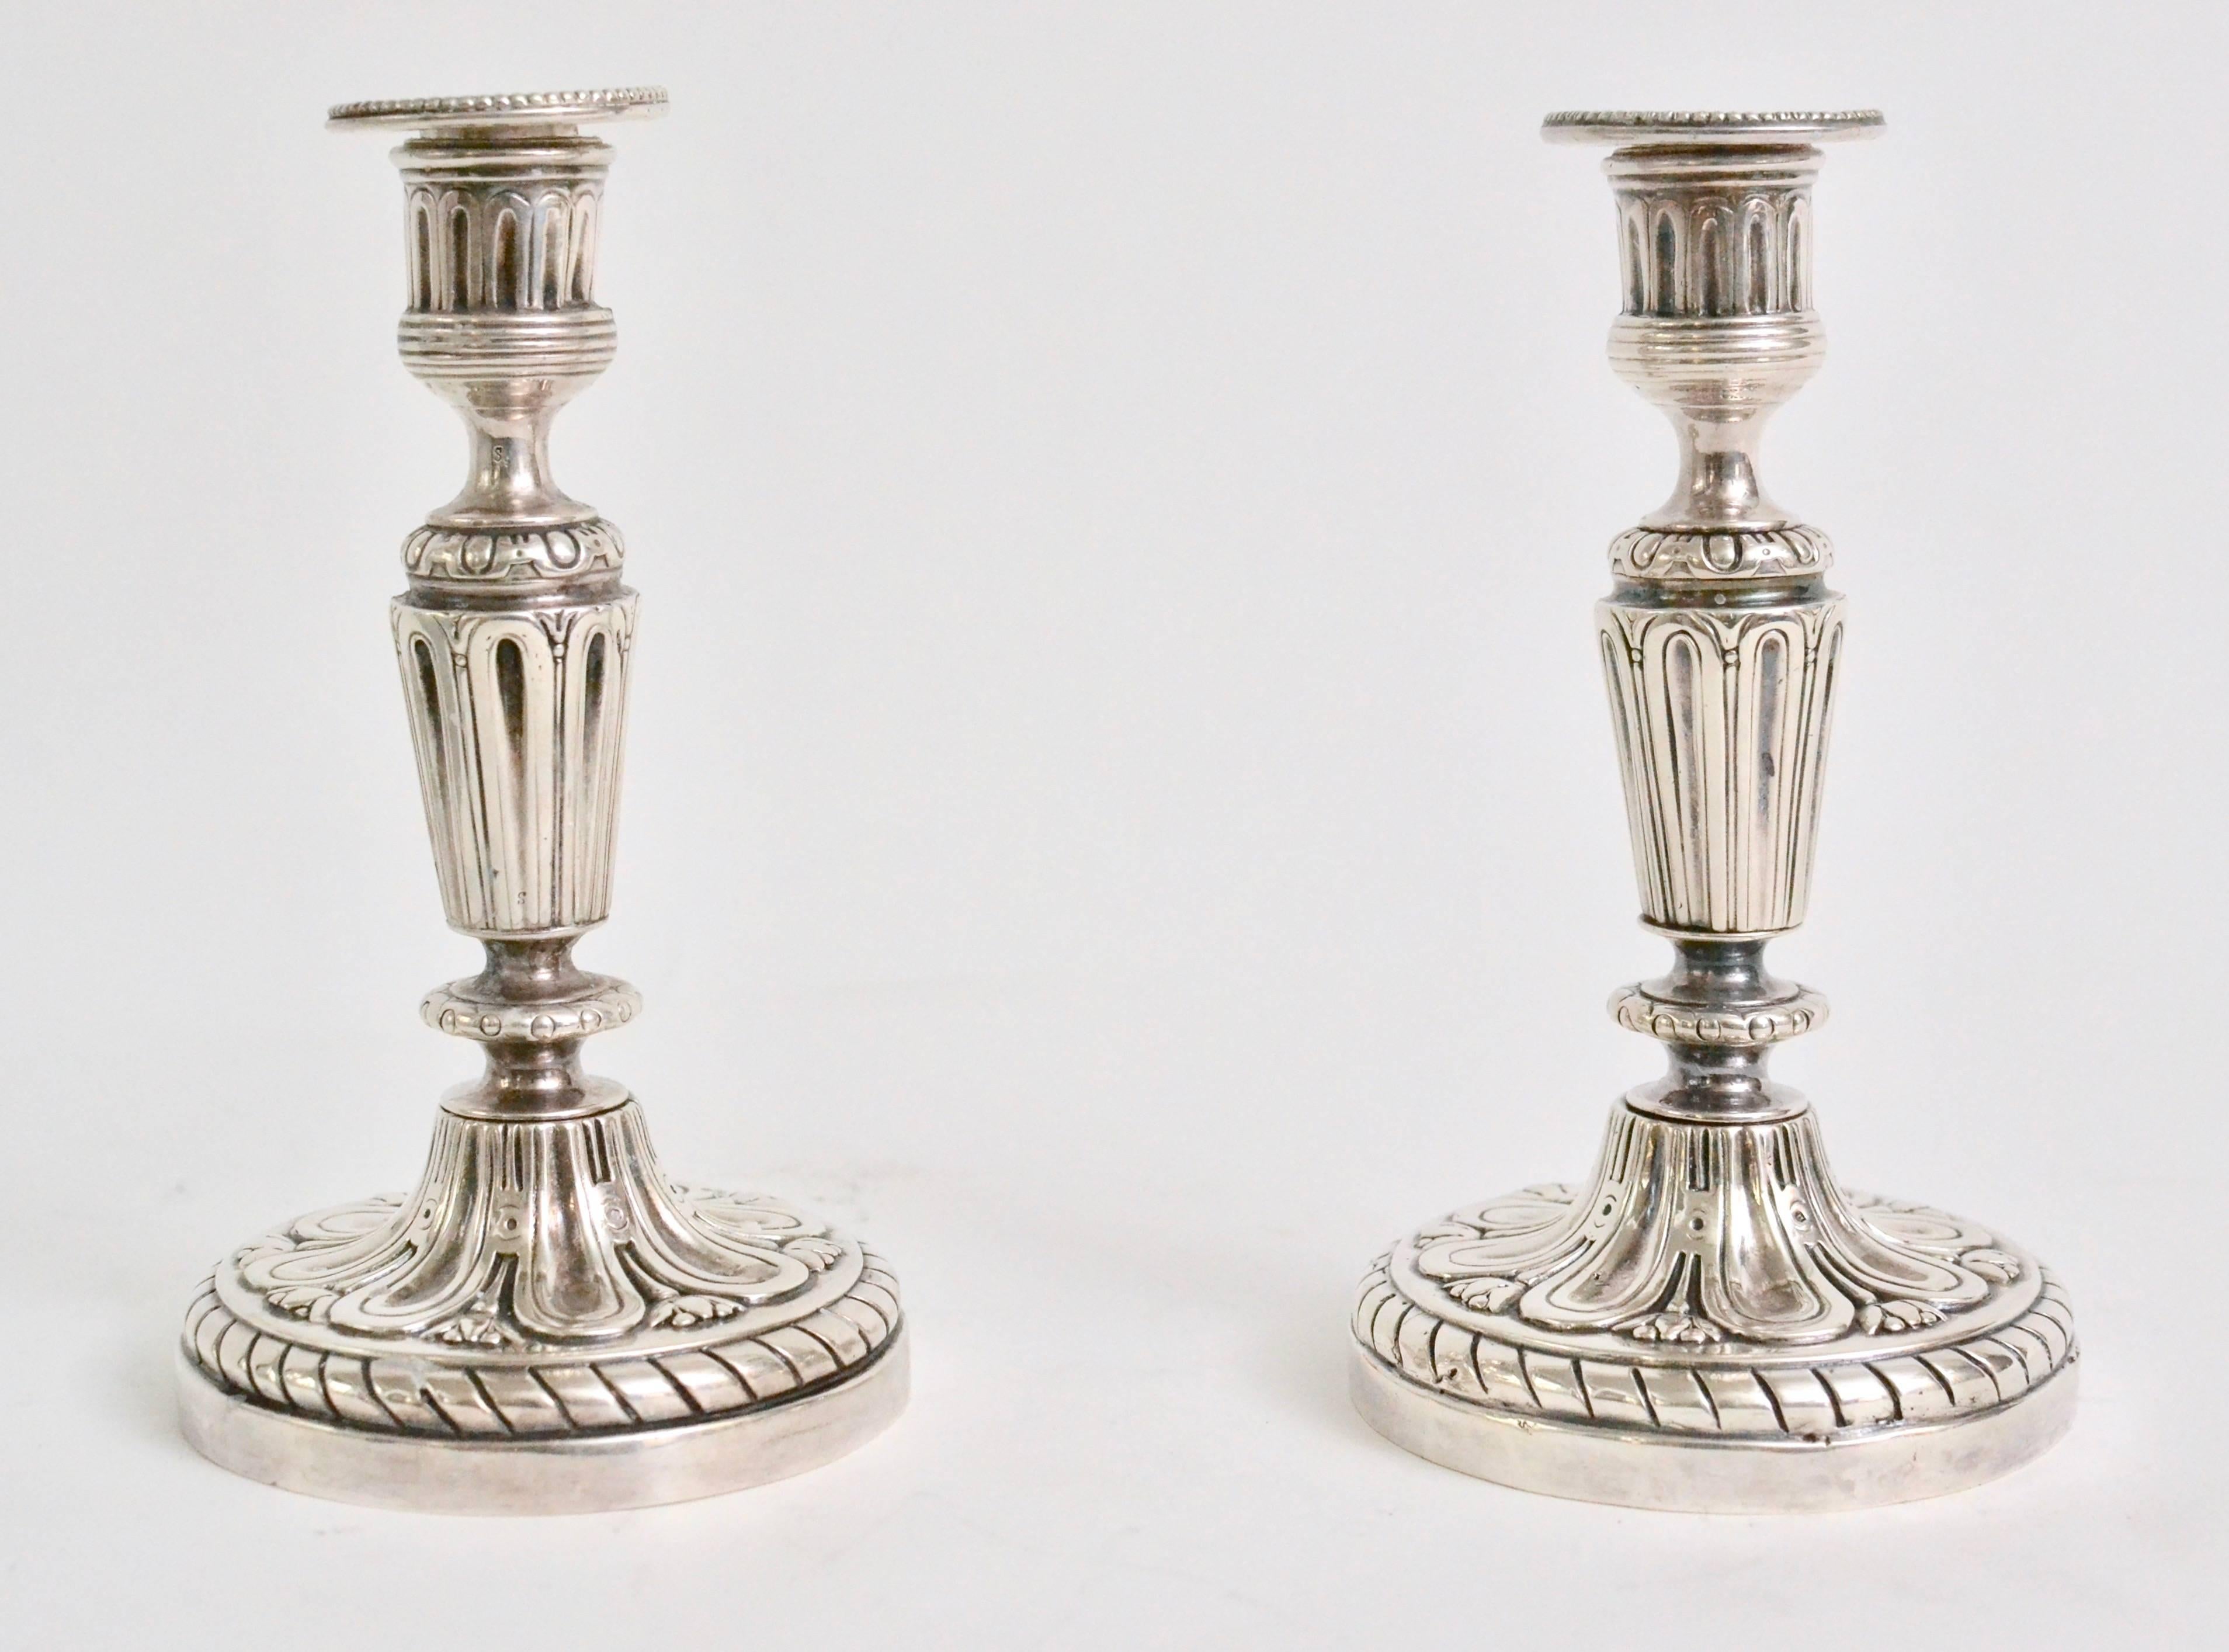 A fine pair of silver-plated bronze Louis XVI candlesticks. 18th century. During the 18th century and very early 19th century the silver plating technique was called argent haché which means hacked silver. Later in the 19th century the